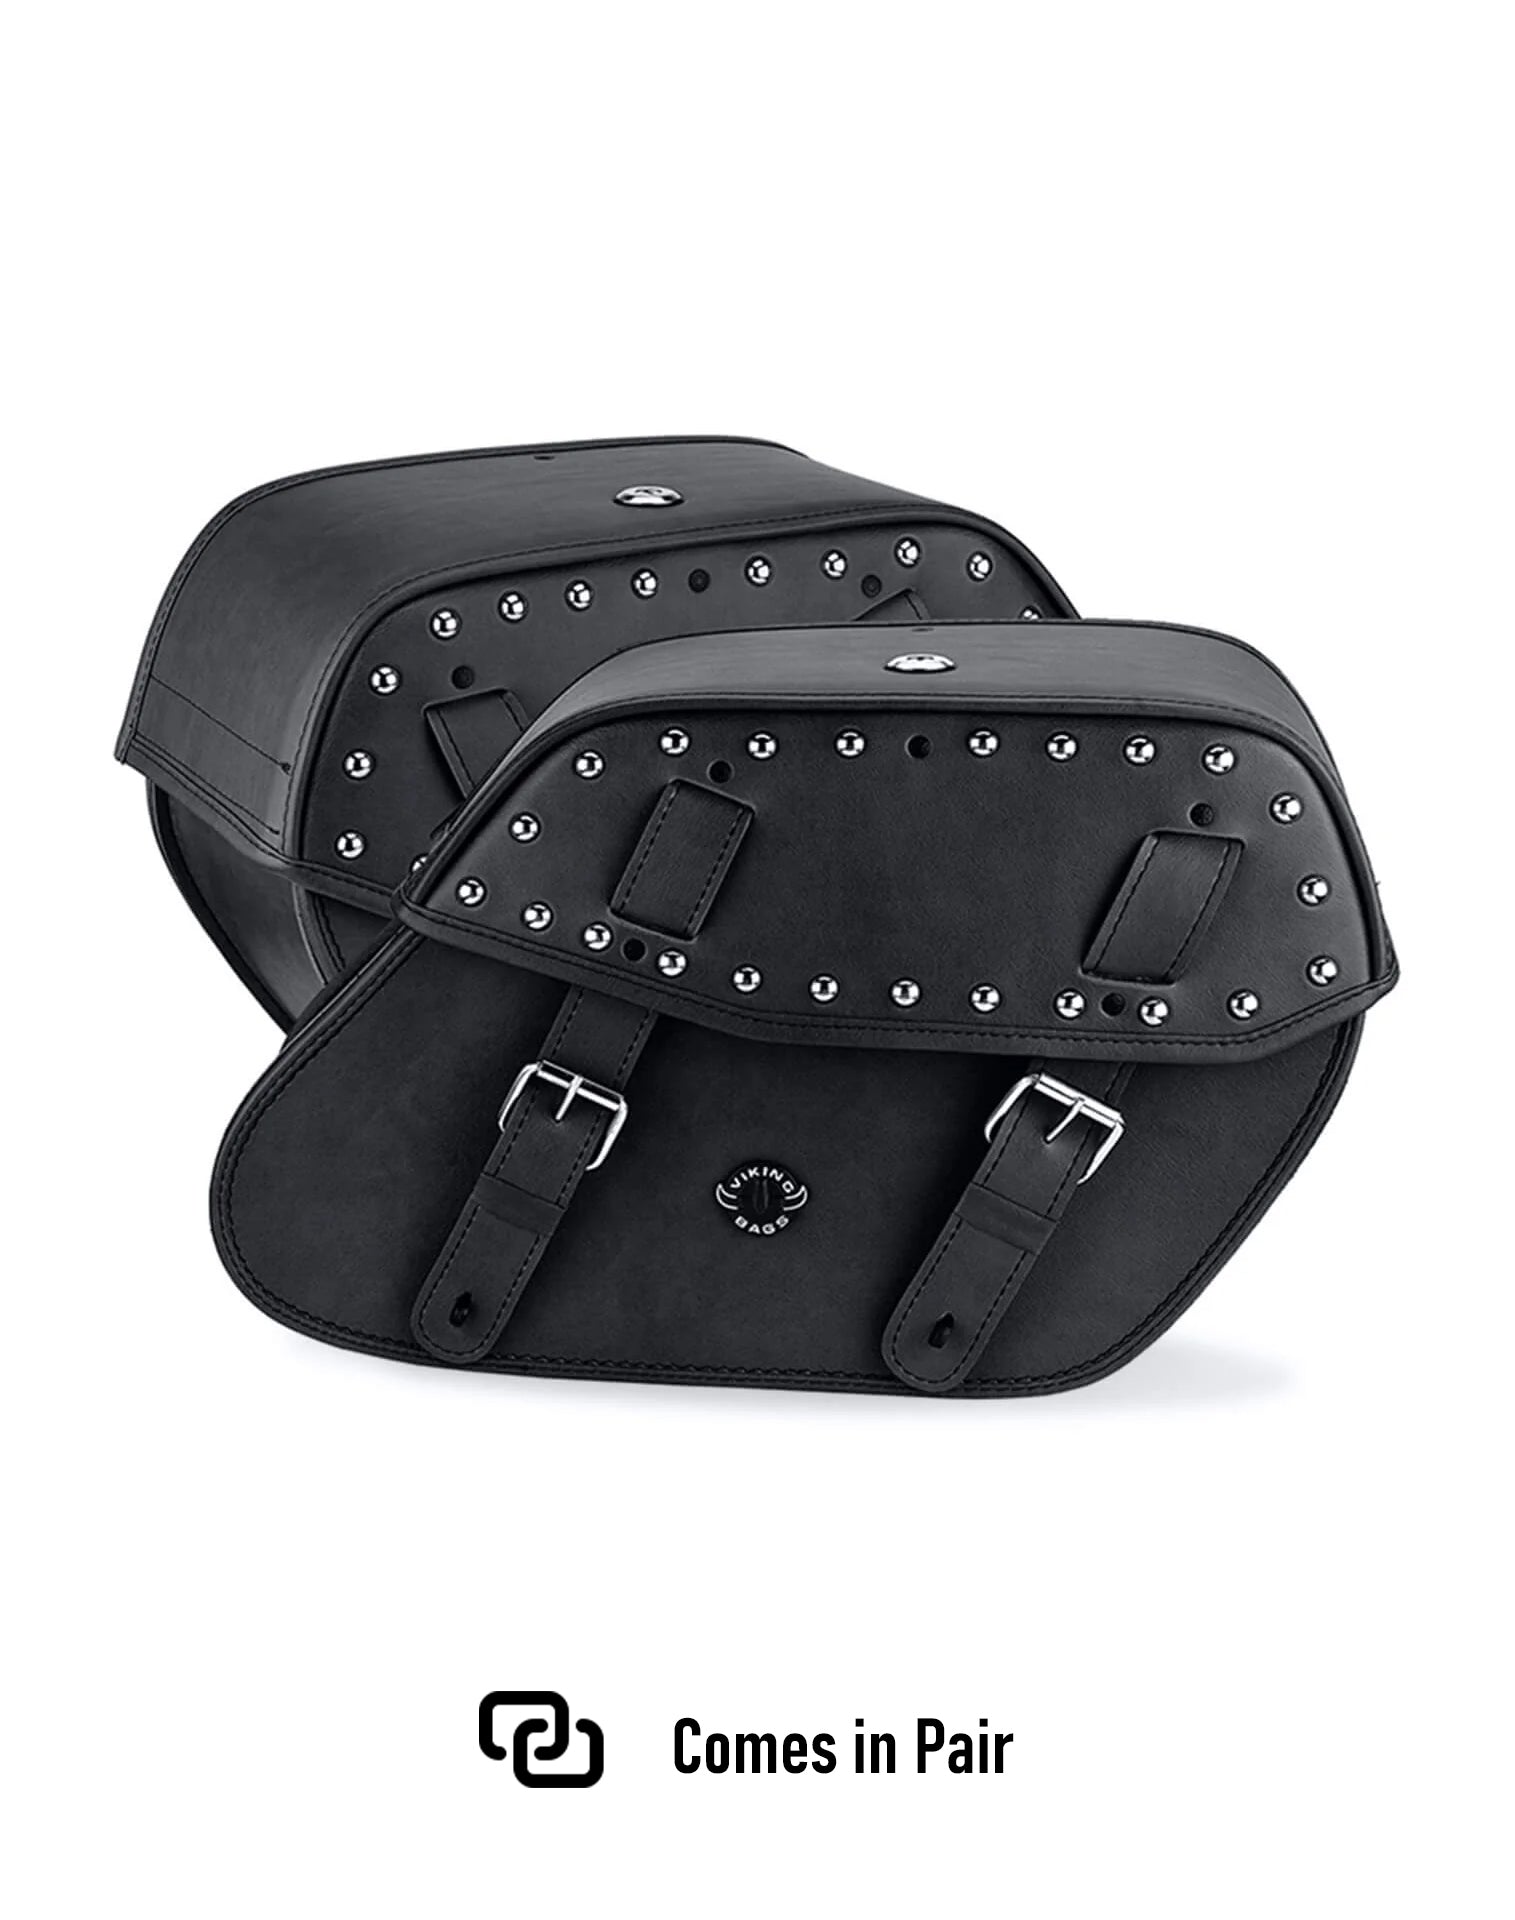 Viking Odin Large Yamaha V Star 950 Studded Leather Motorcycle Saddlebags Weather Resistant Bags Comes in Pair